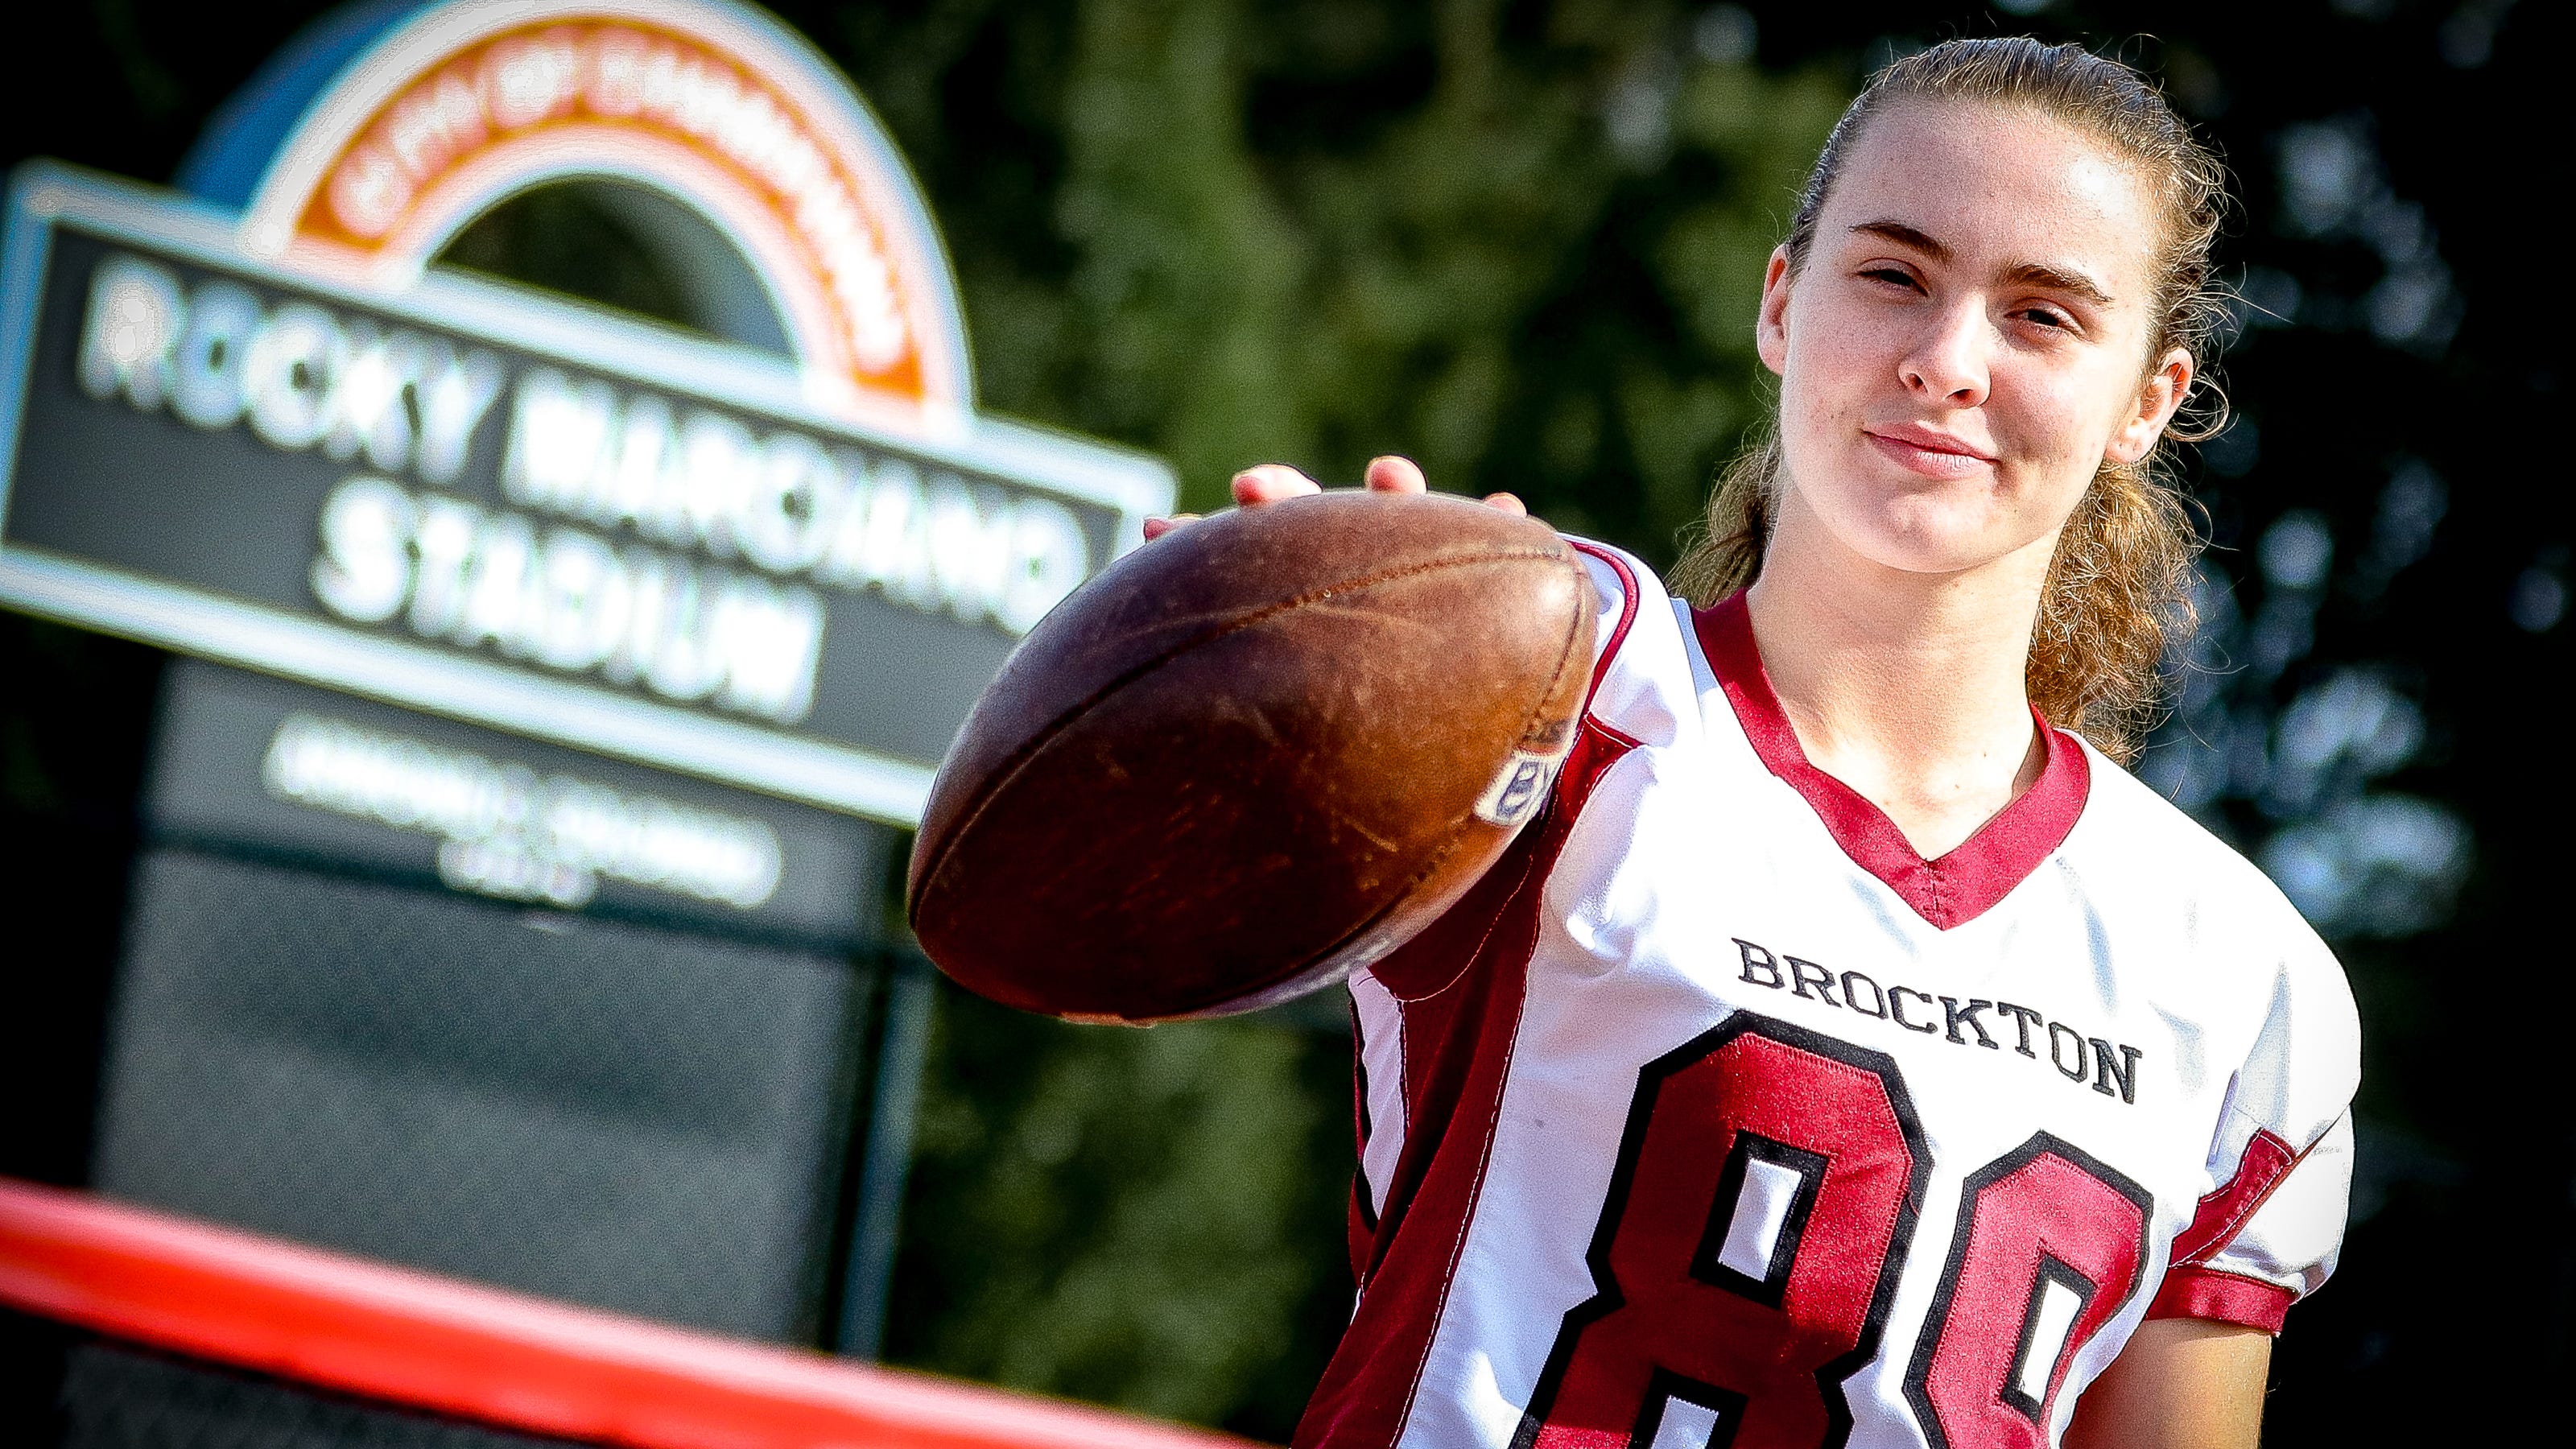 Quinn is first girl to score a touchdown for Brockton football